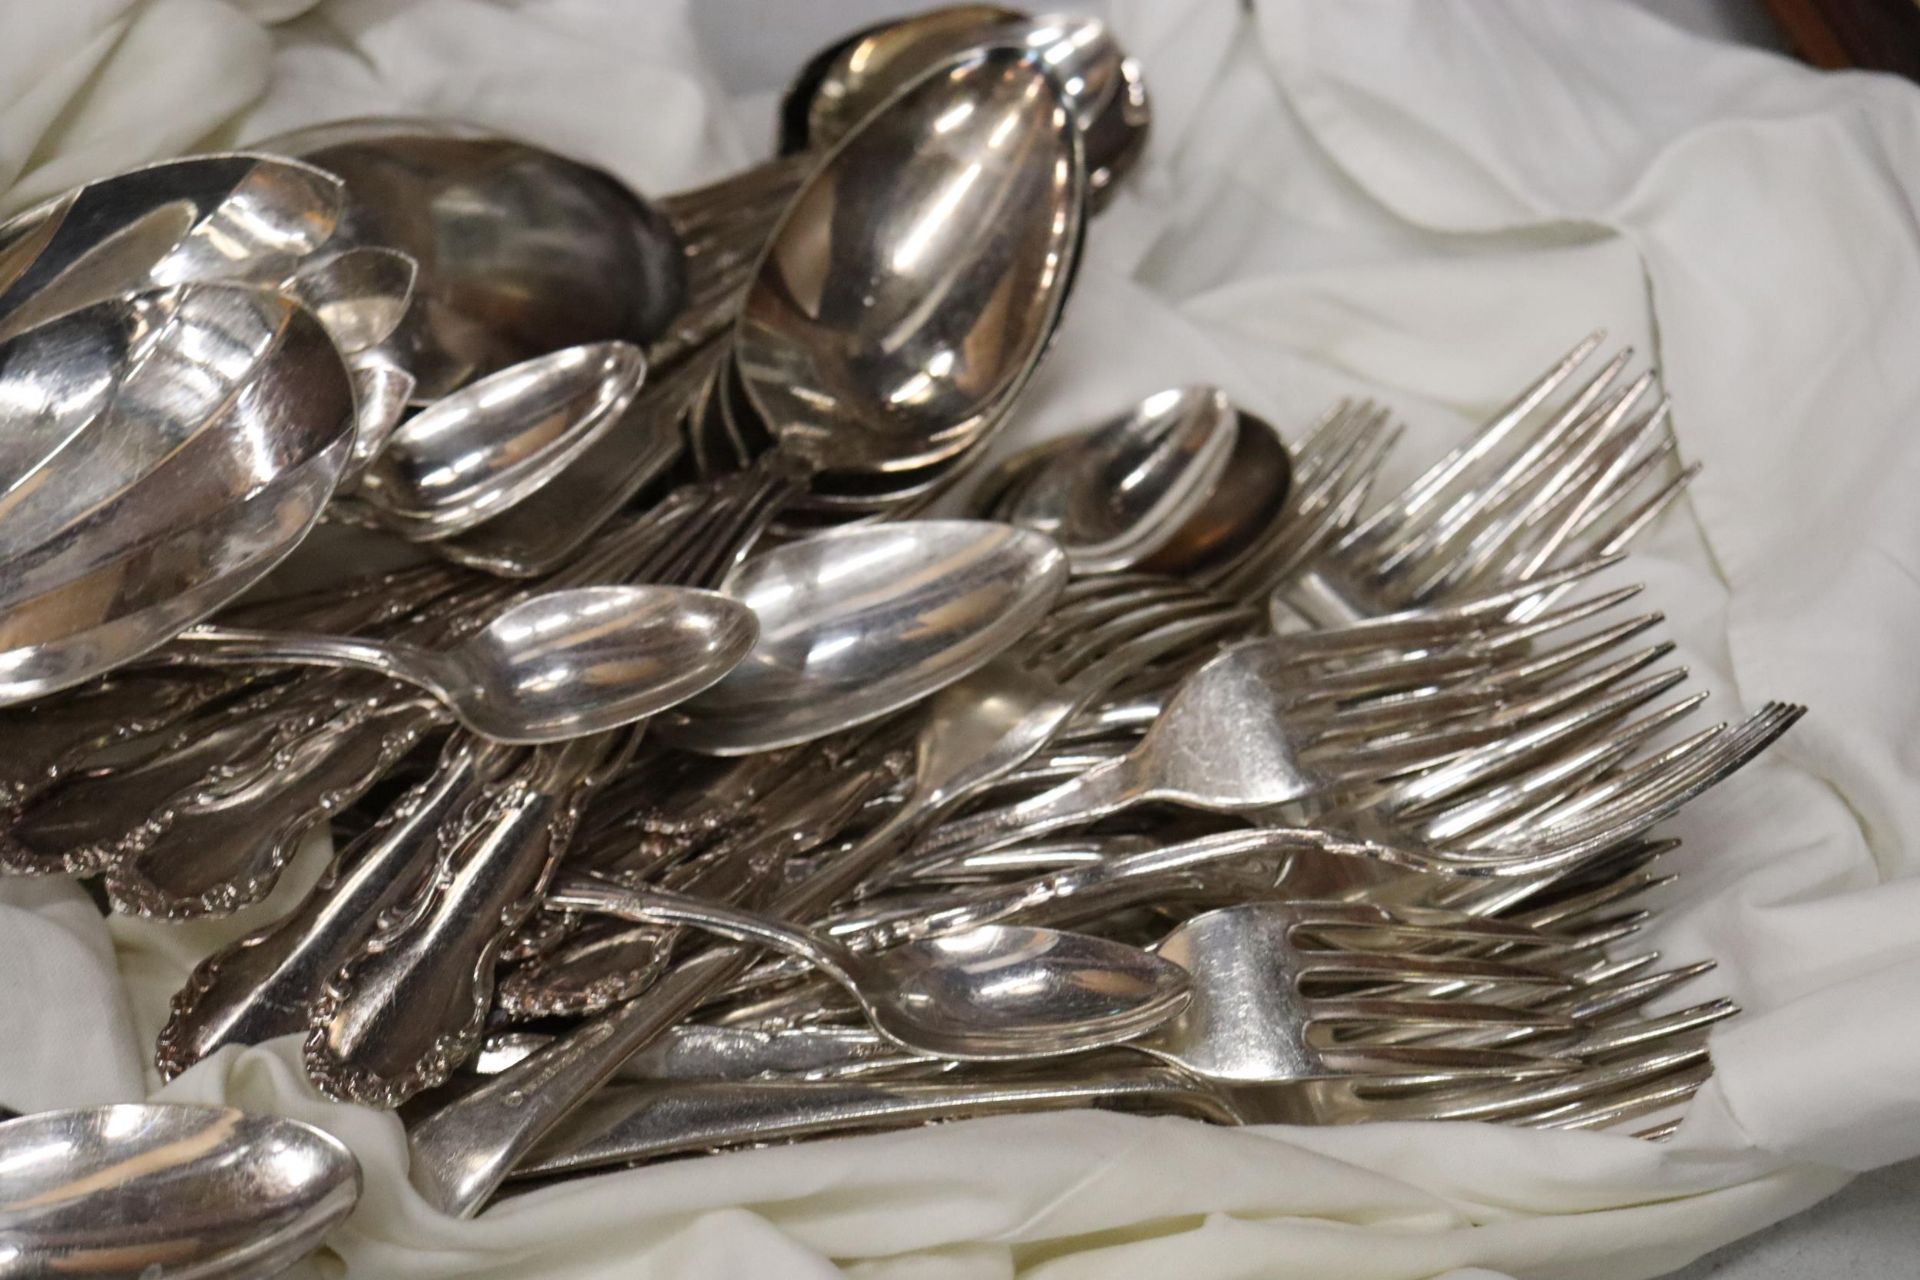 A QUANTITY OF FLATWARE, KNIVES, FORKS AND SPOONS - Image 6 of 9